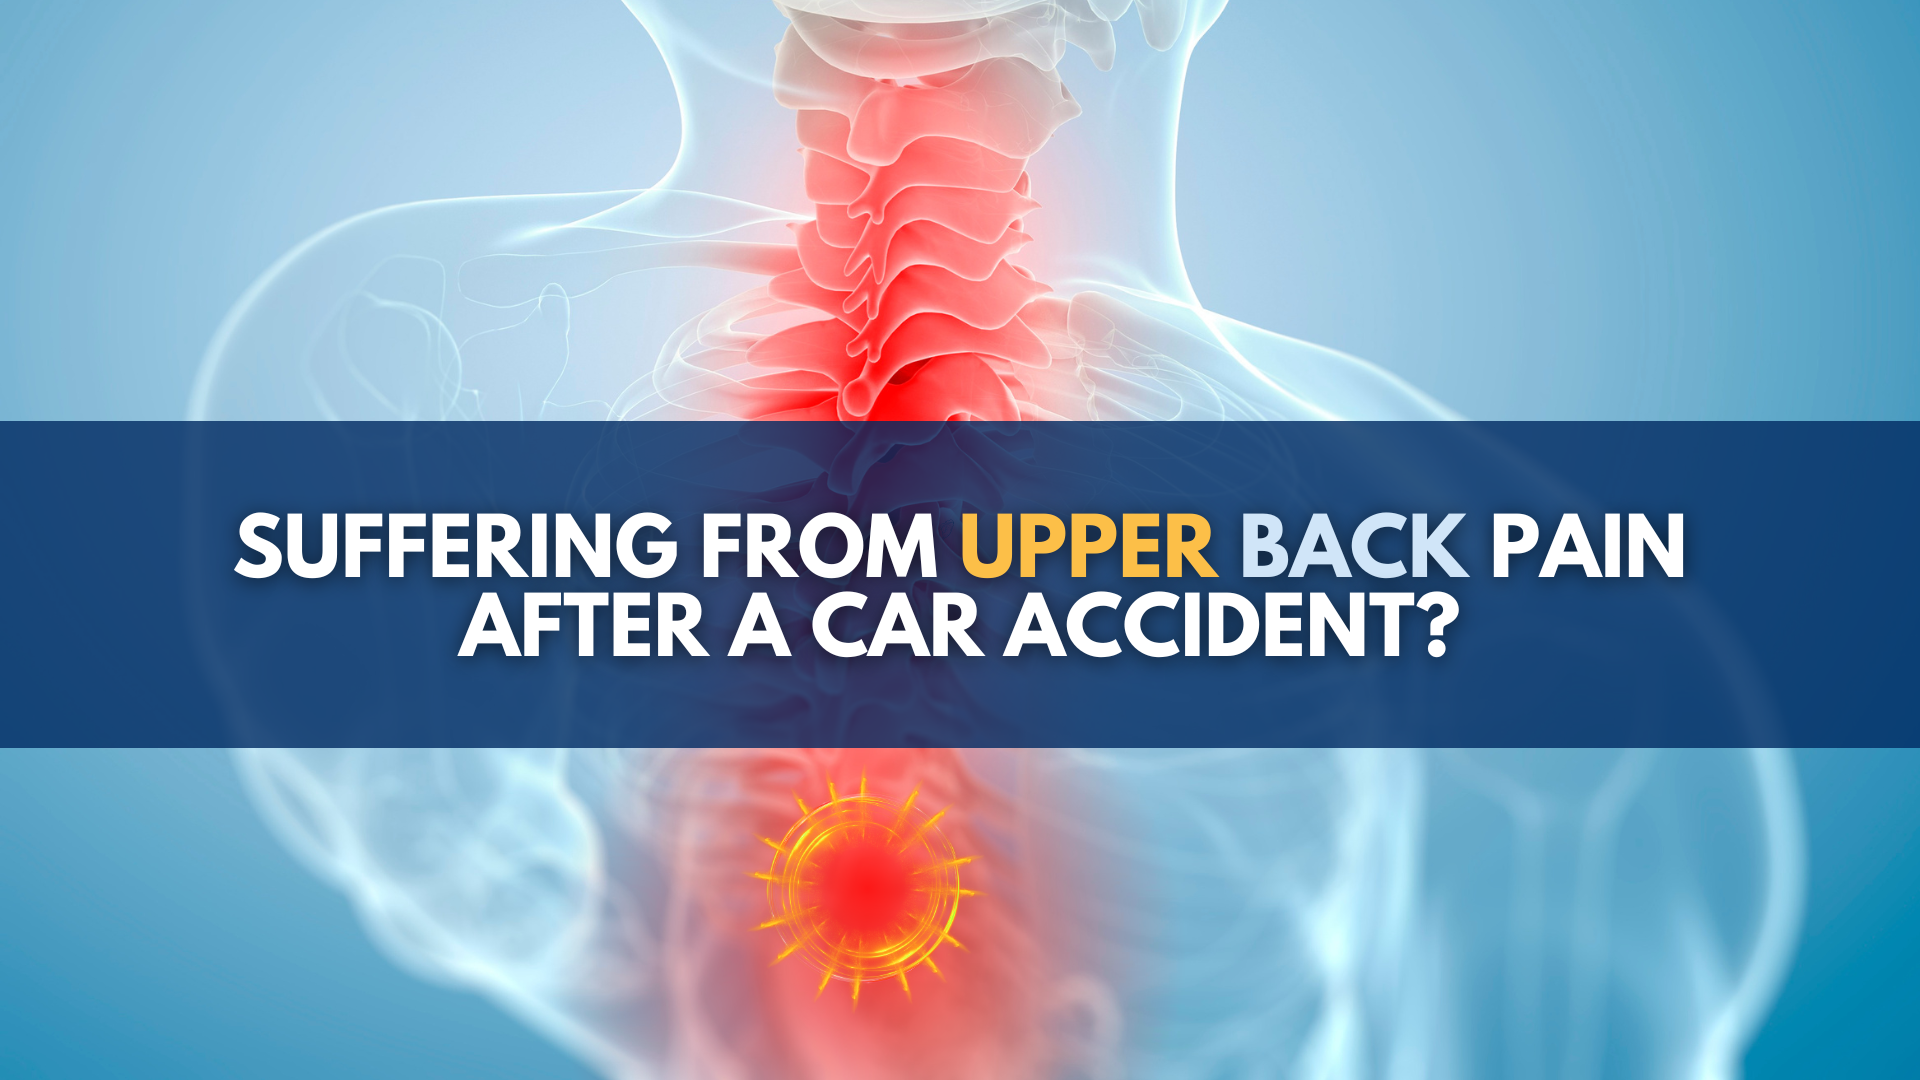 Upper back pain after a car accident